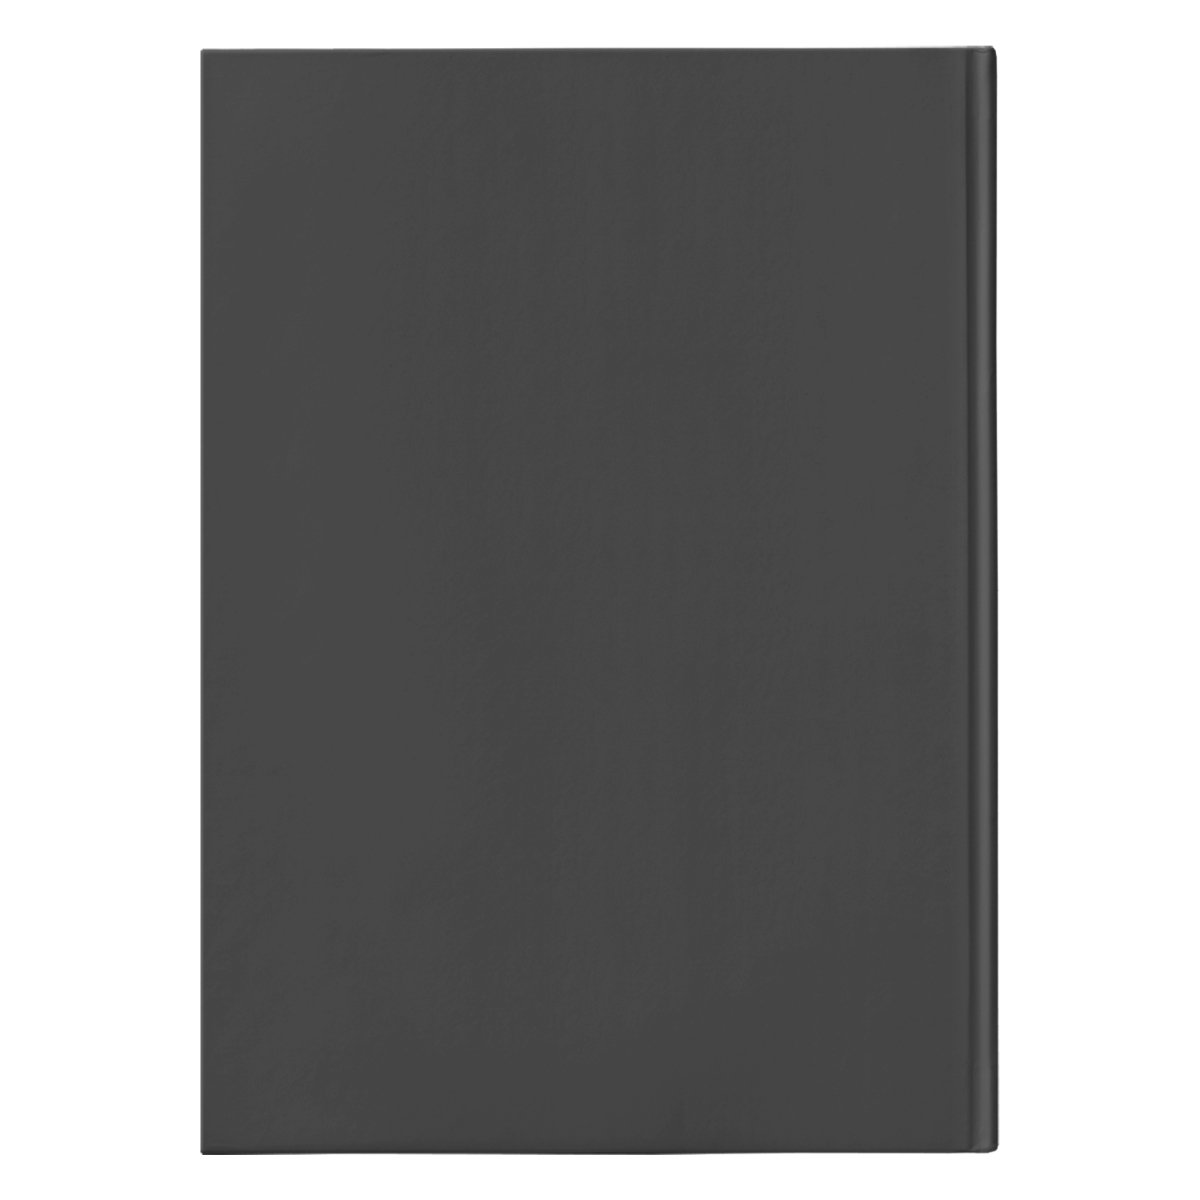 God is Most Glorified (150 Page Hardcover Journal) - SDG Clothing